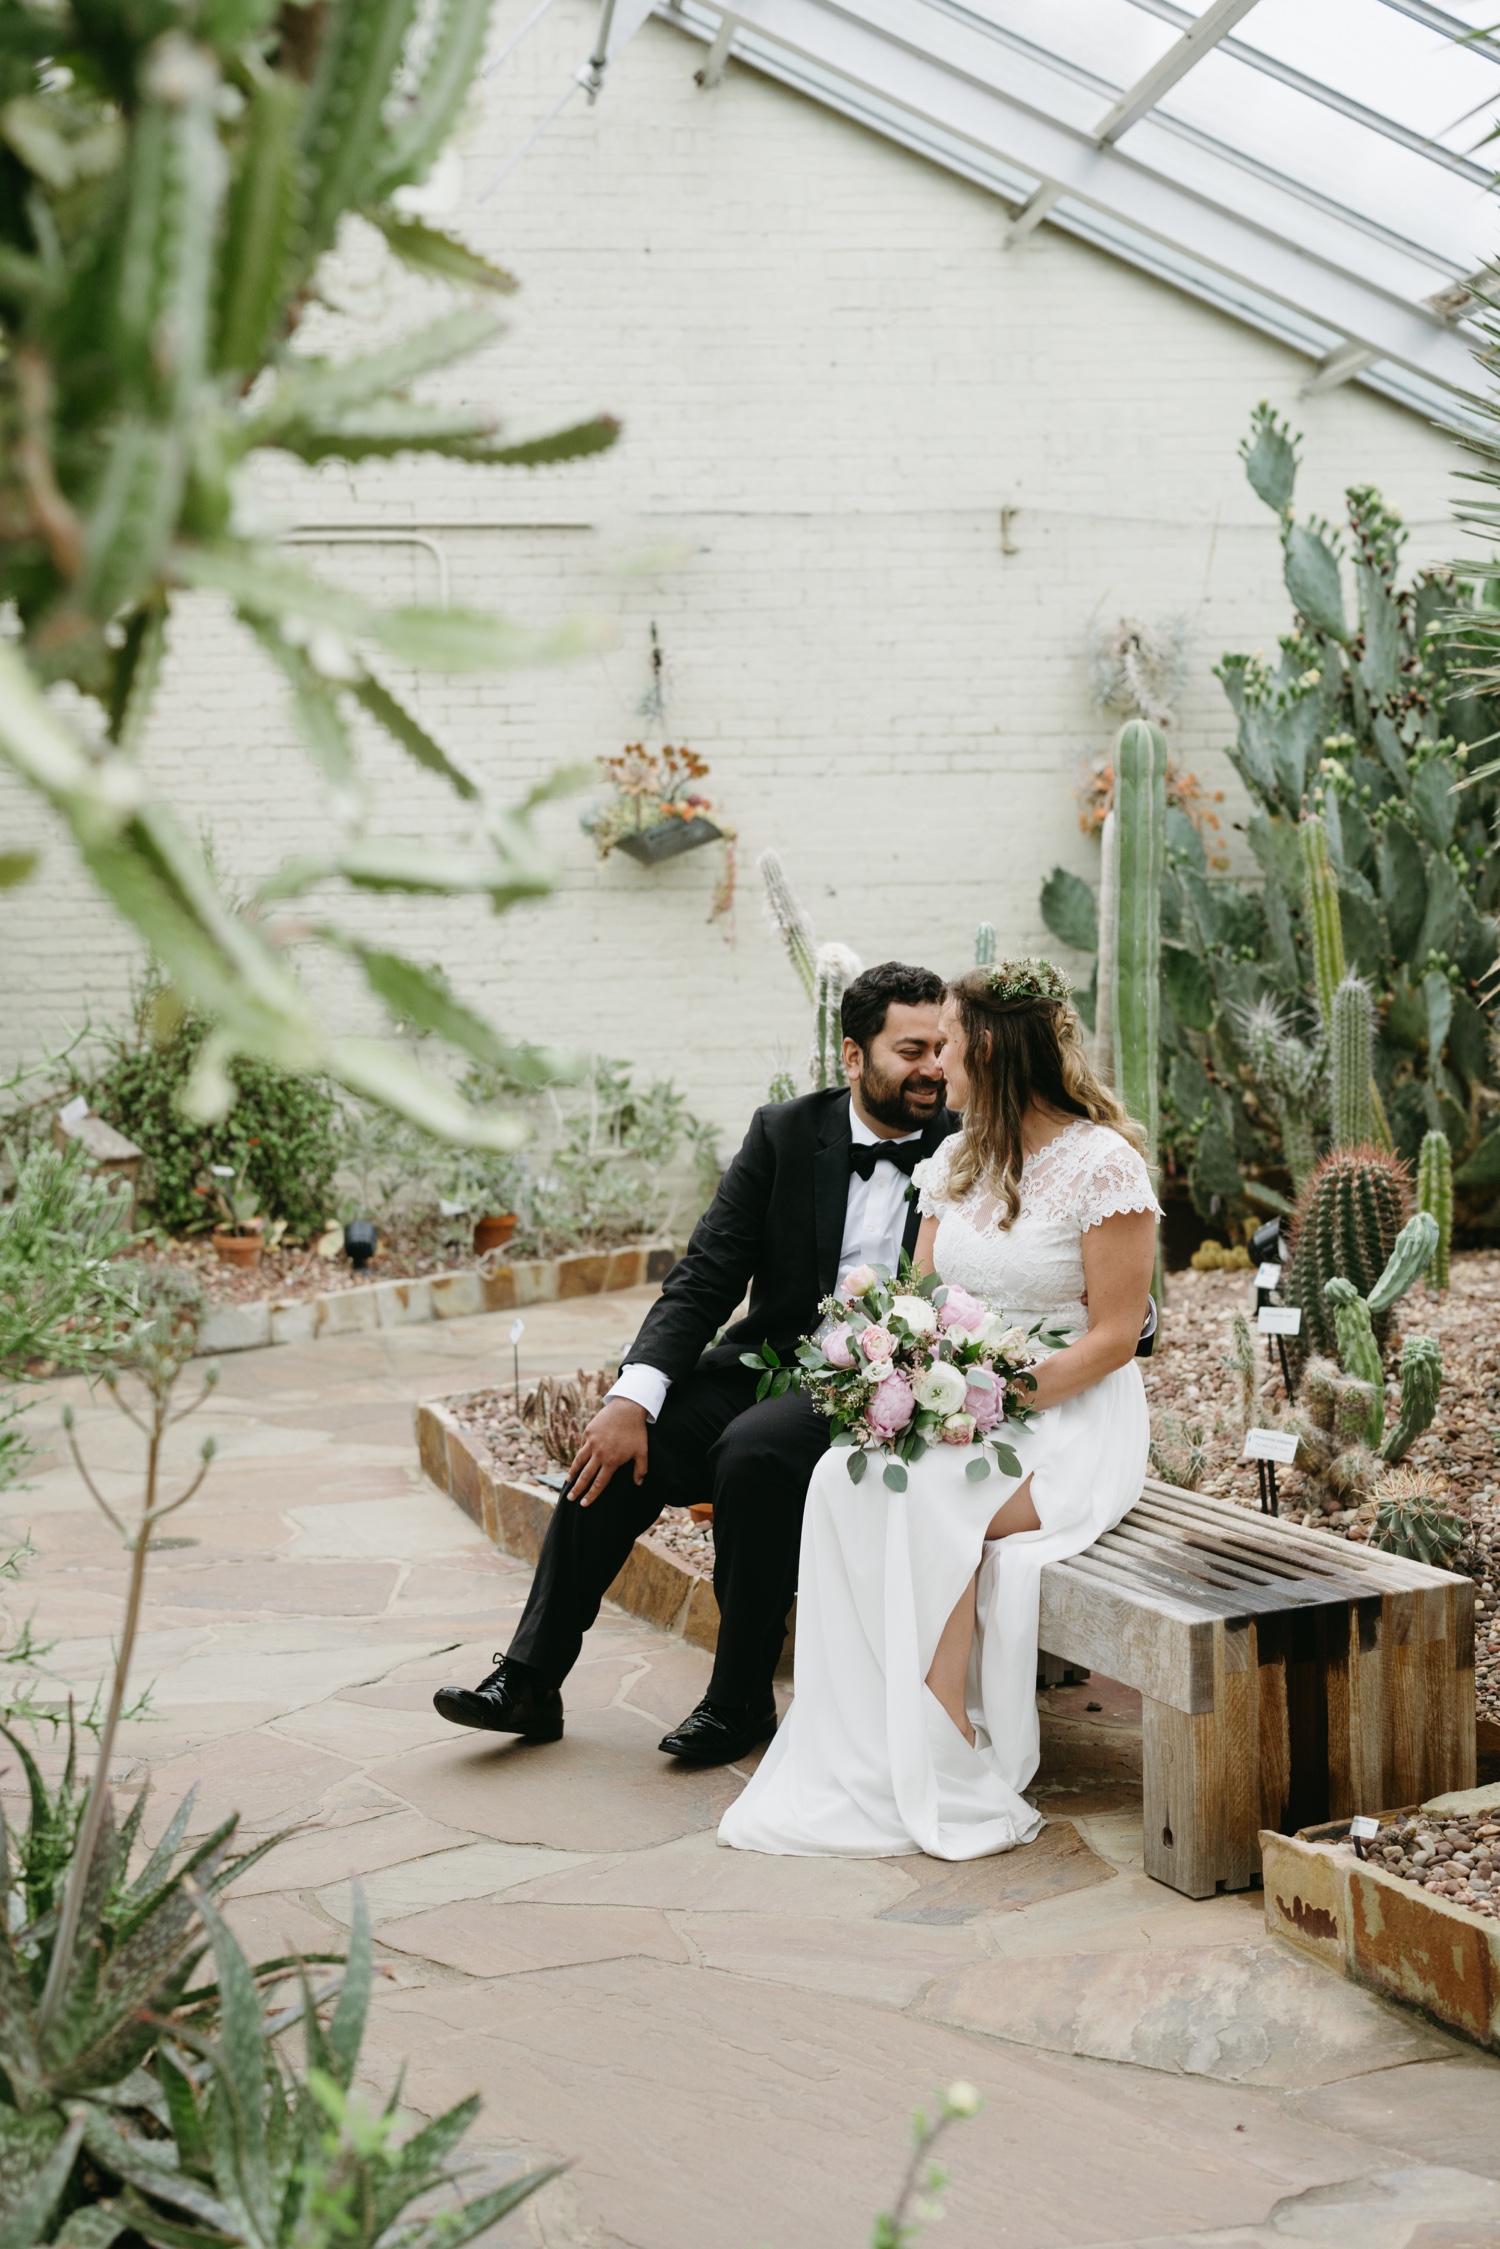 Rawlings Conservatory Baltimore Elopement bride and groom seated on bench looking into each others eyes surrounded by desert flora